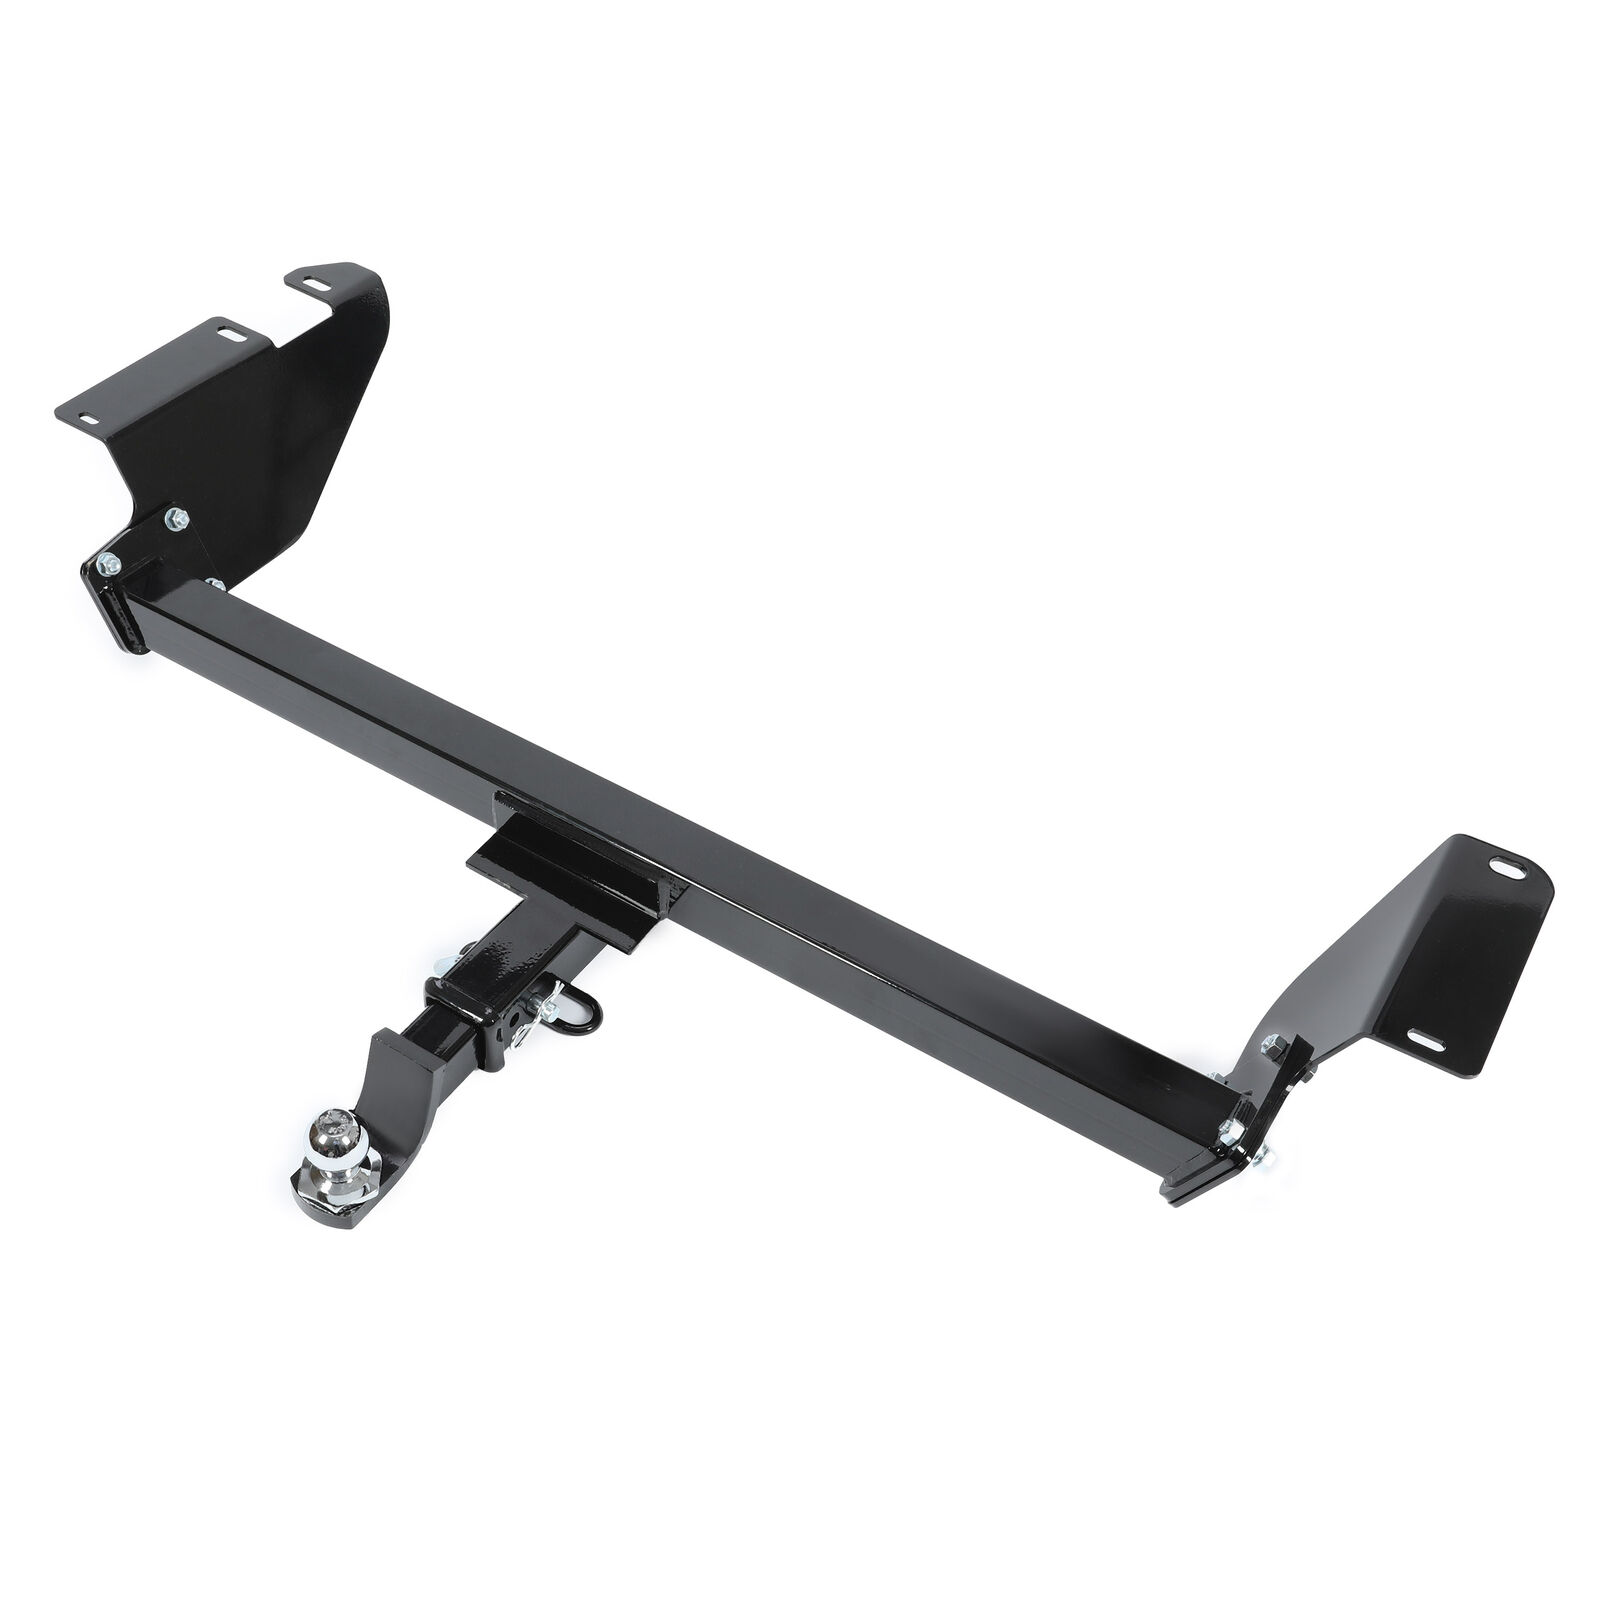 Trailer Hitch Class 3 For 2008-2020 Dodge Grand Caravan Chrysler Town Country